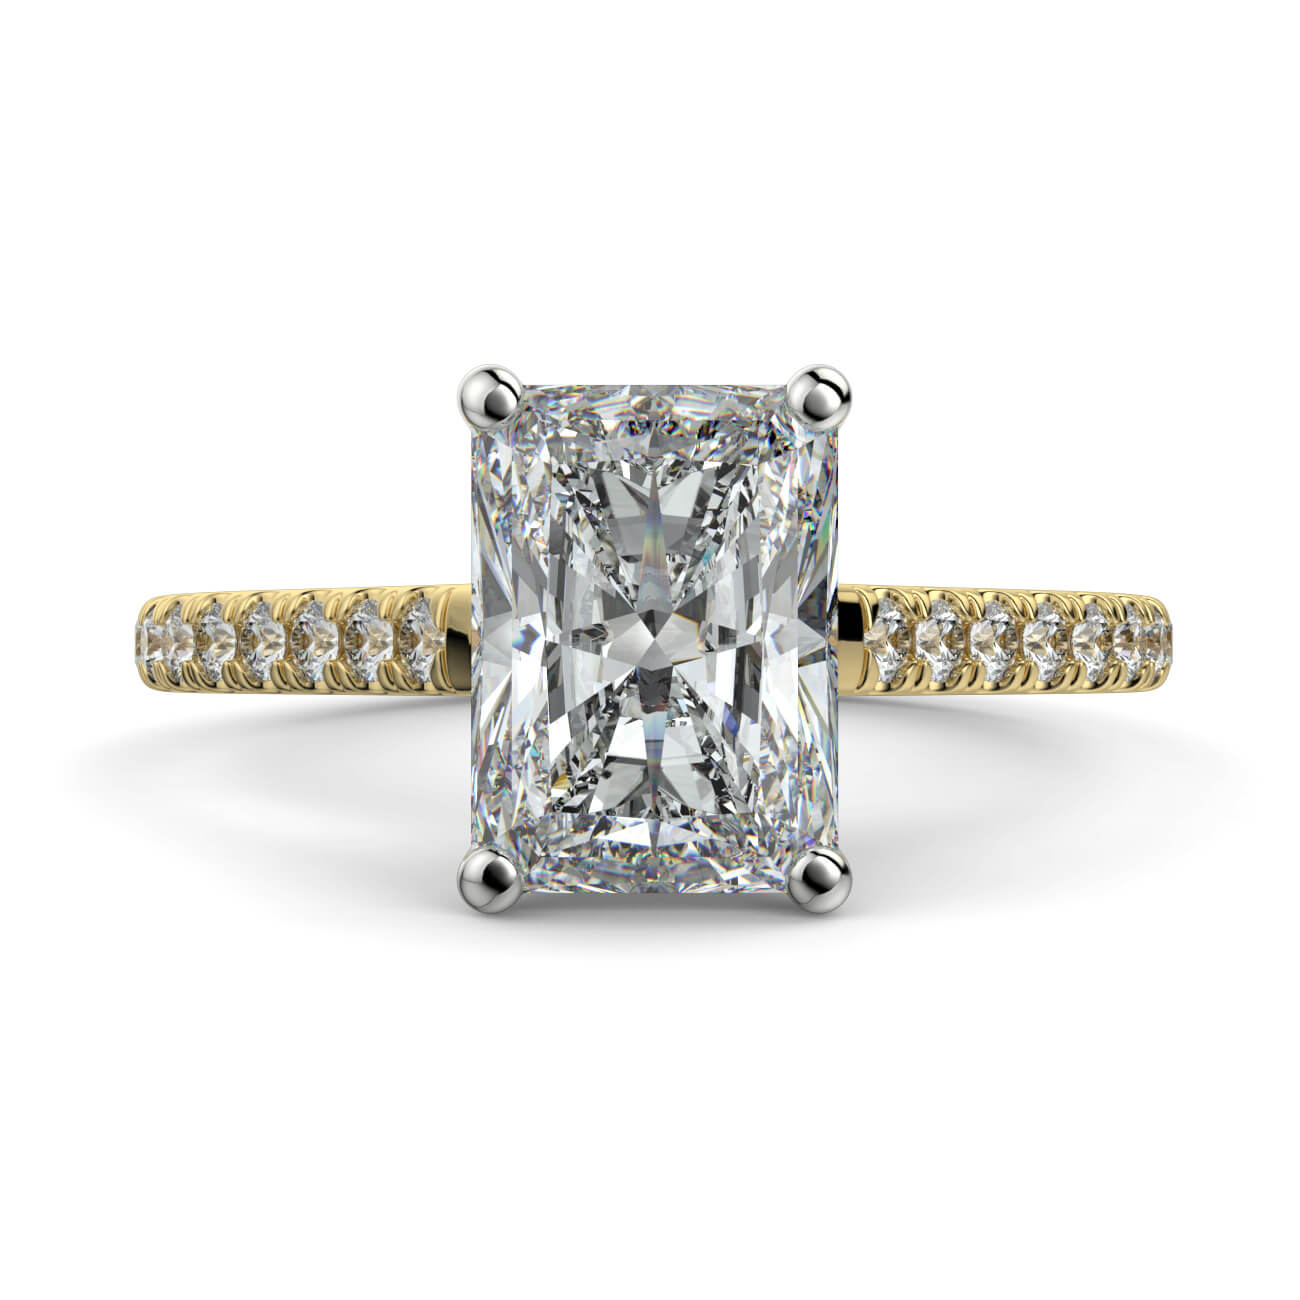 Radiant cut diamond cathedral engagement ring in yellow and white gold – Australian Diamond Network